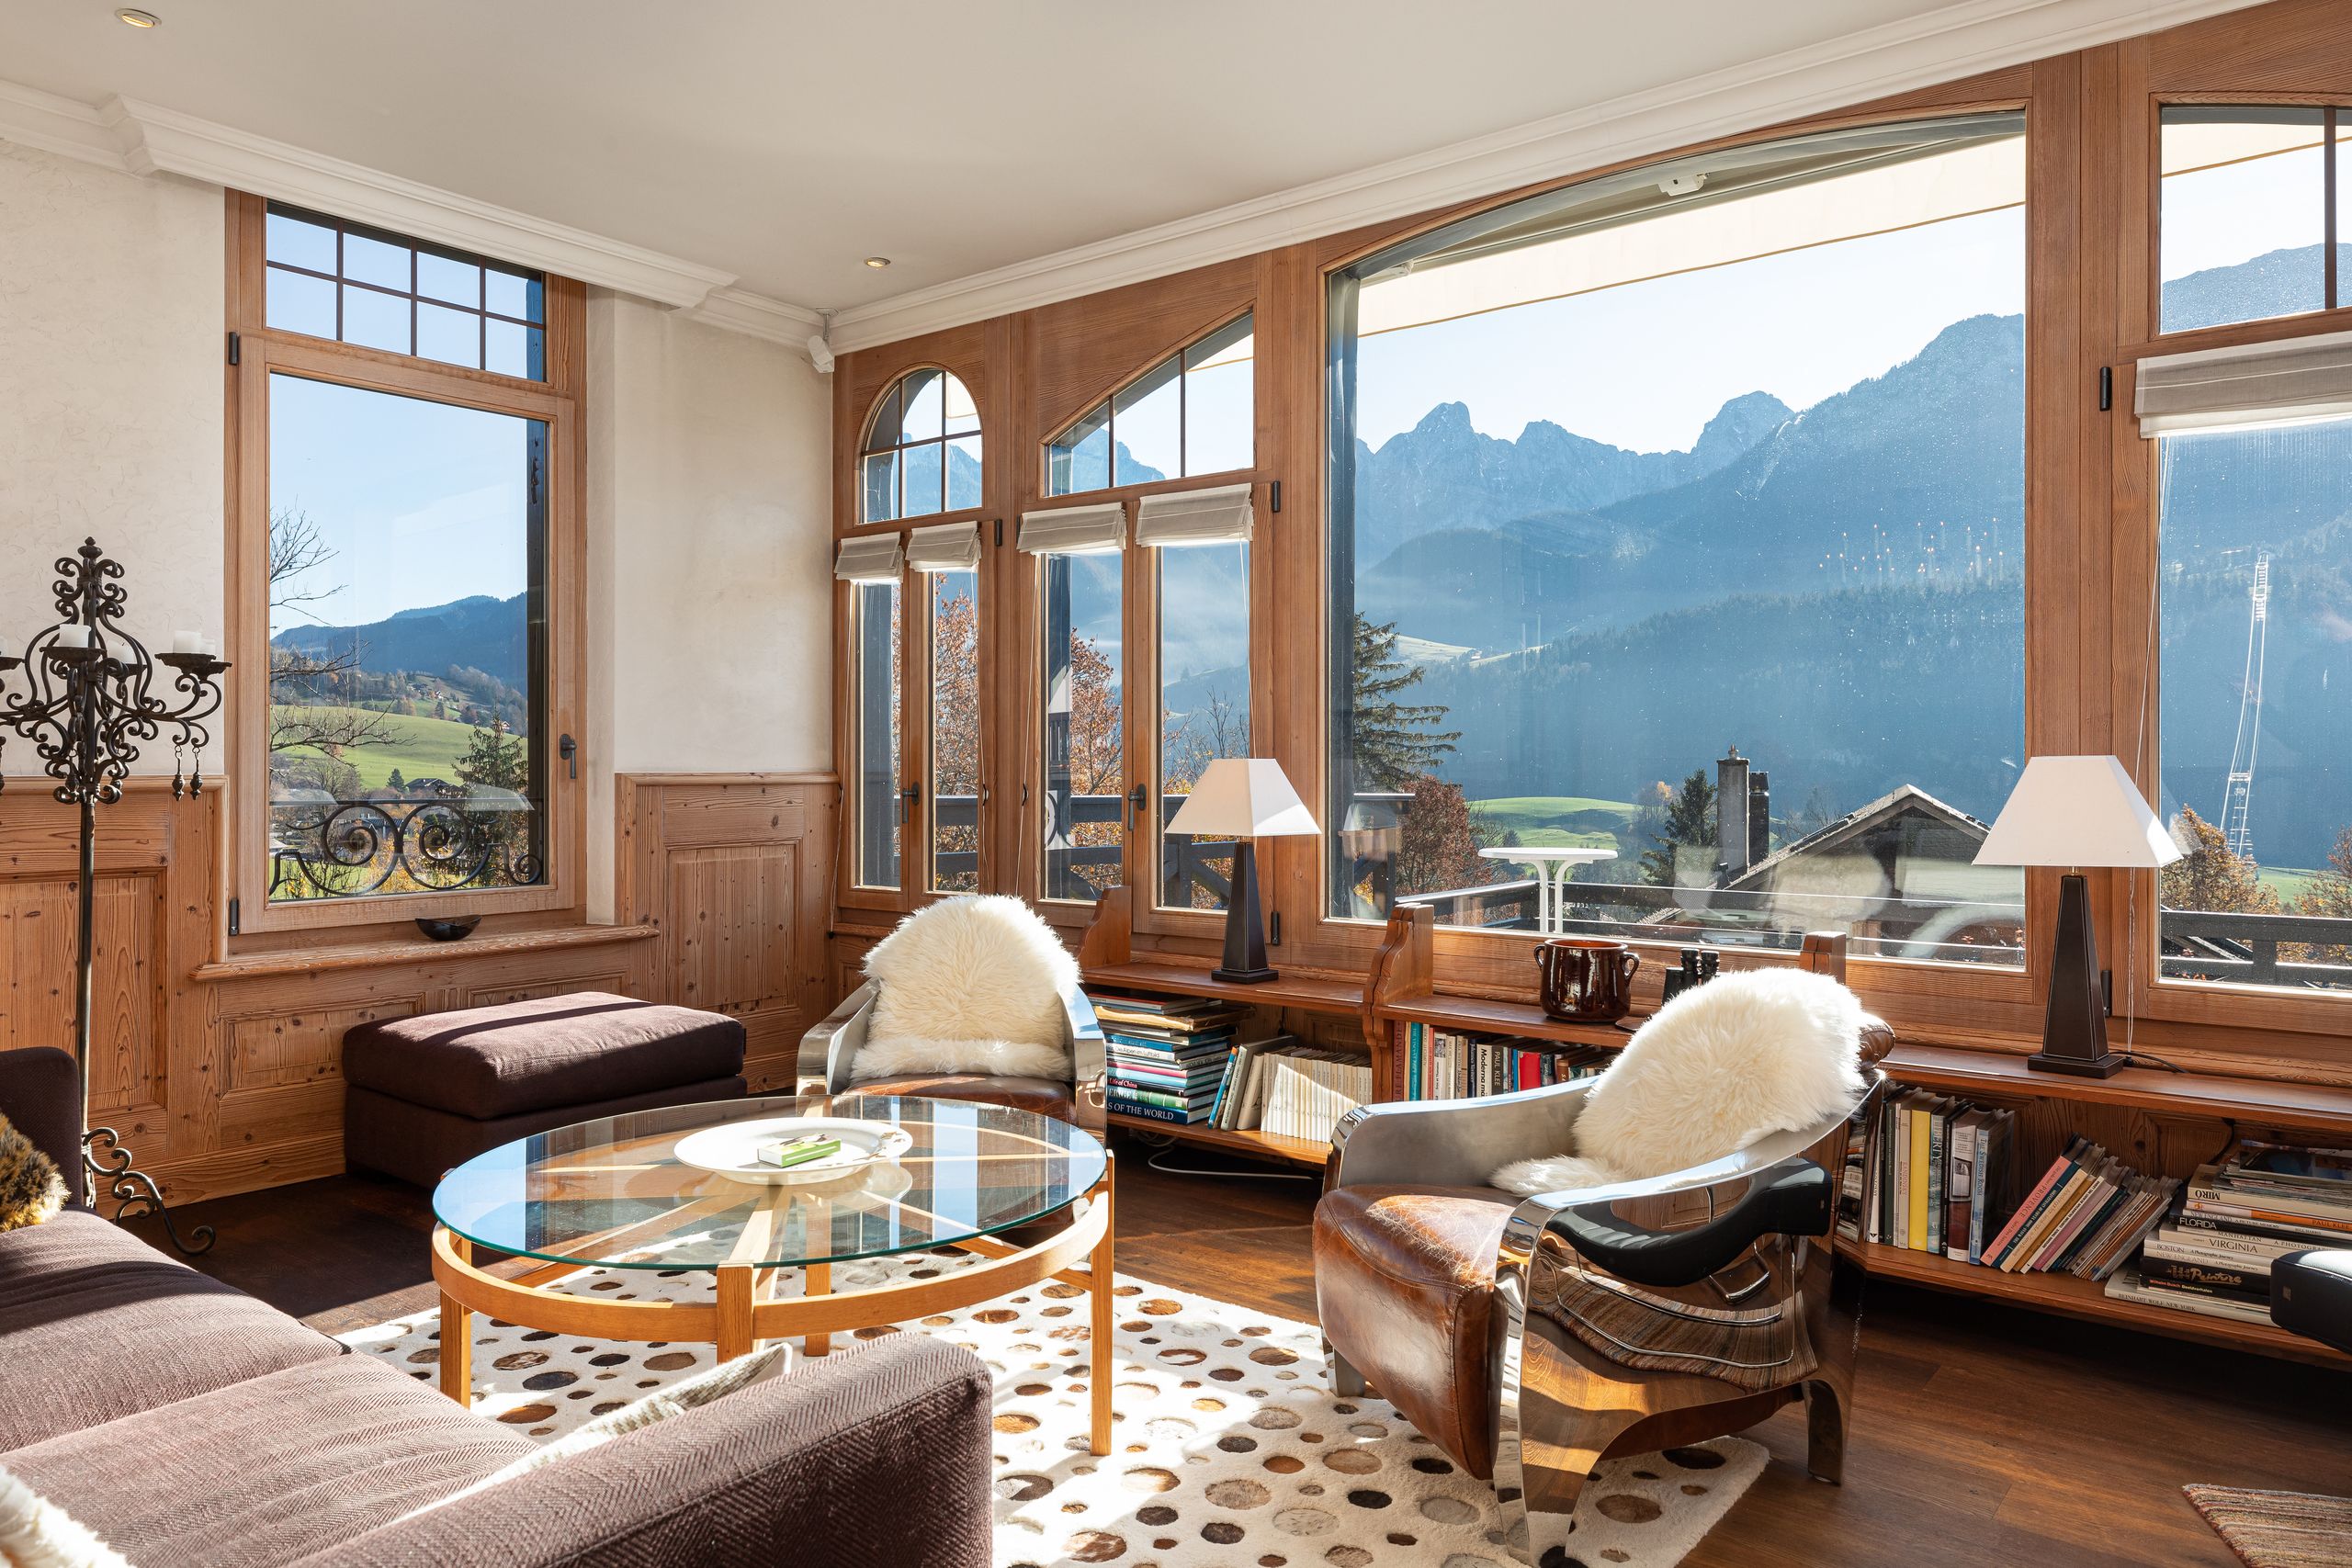 Spacious living room with a splendid view of the mountains